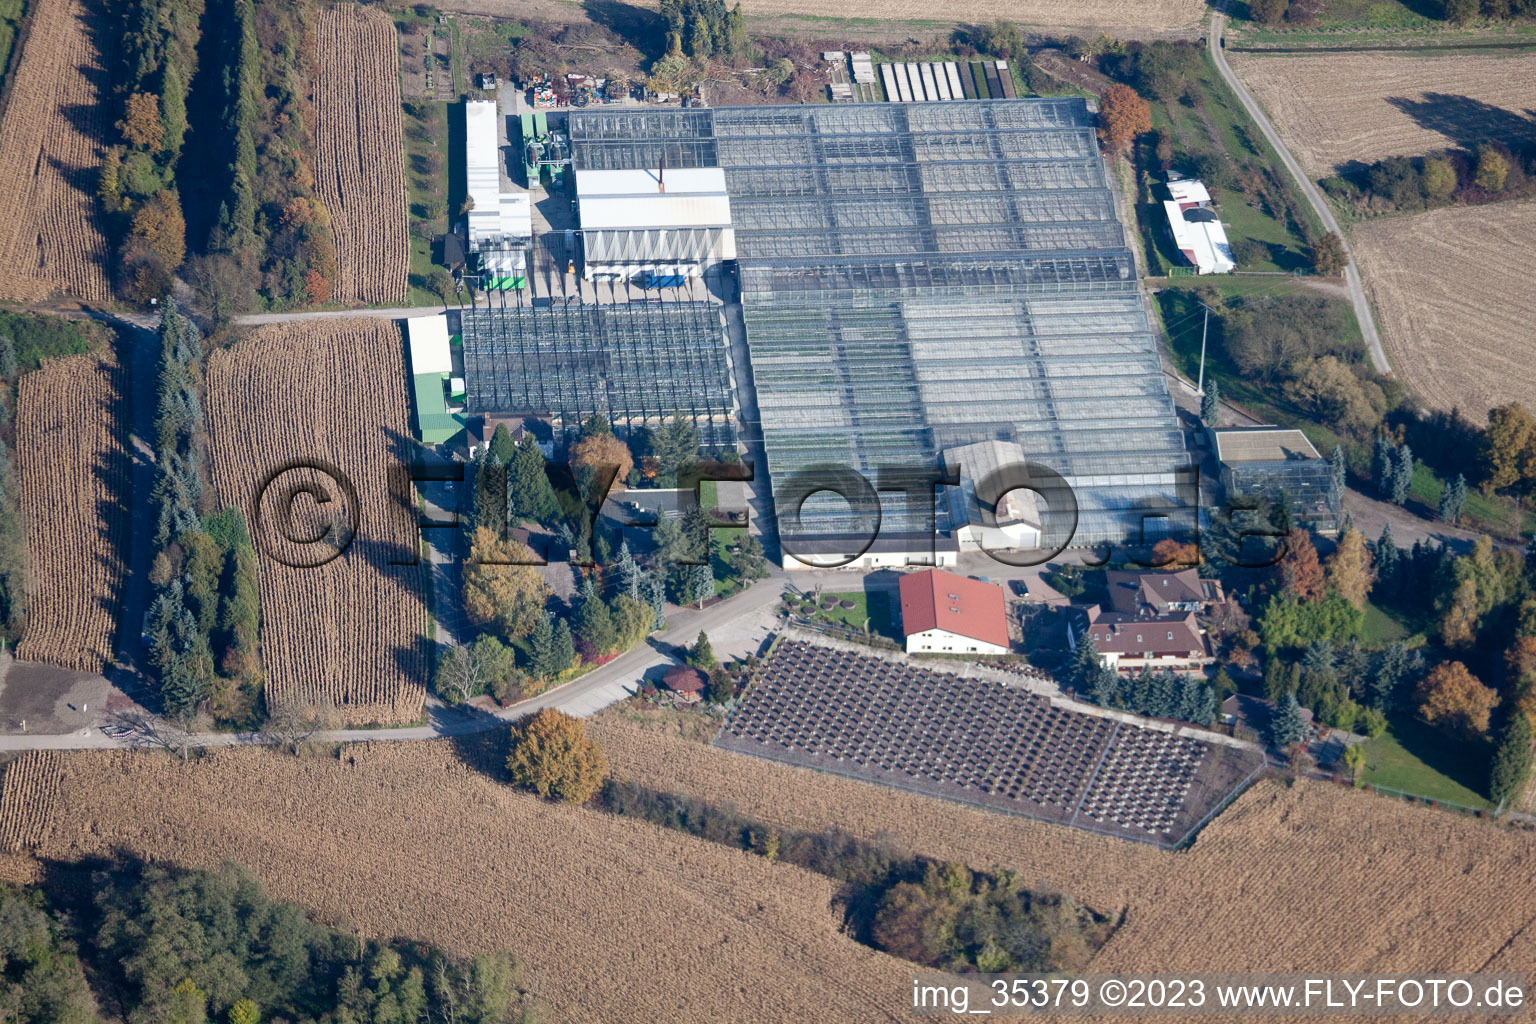 Geranium Endisch GmbH in Hagenbach in the state Rhineland-Palatinate, Germany from the drone perspective